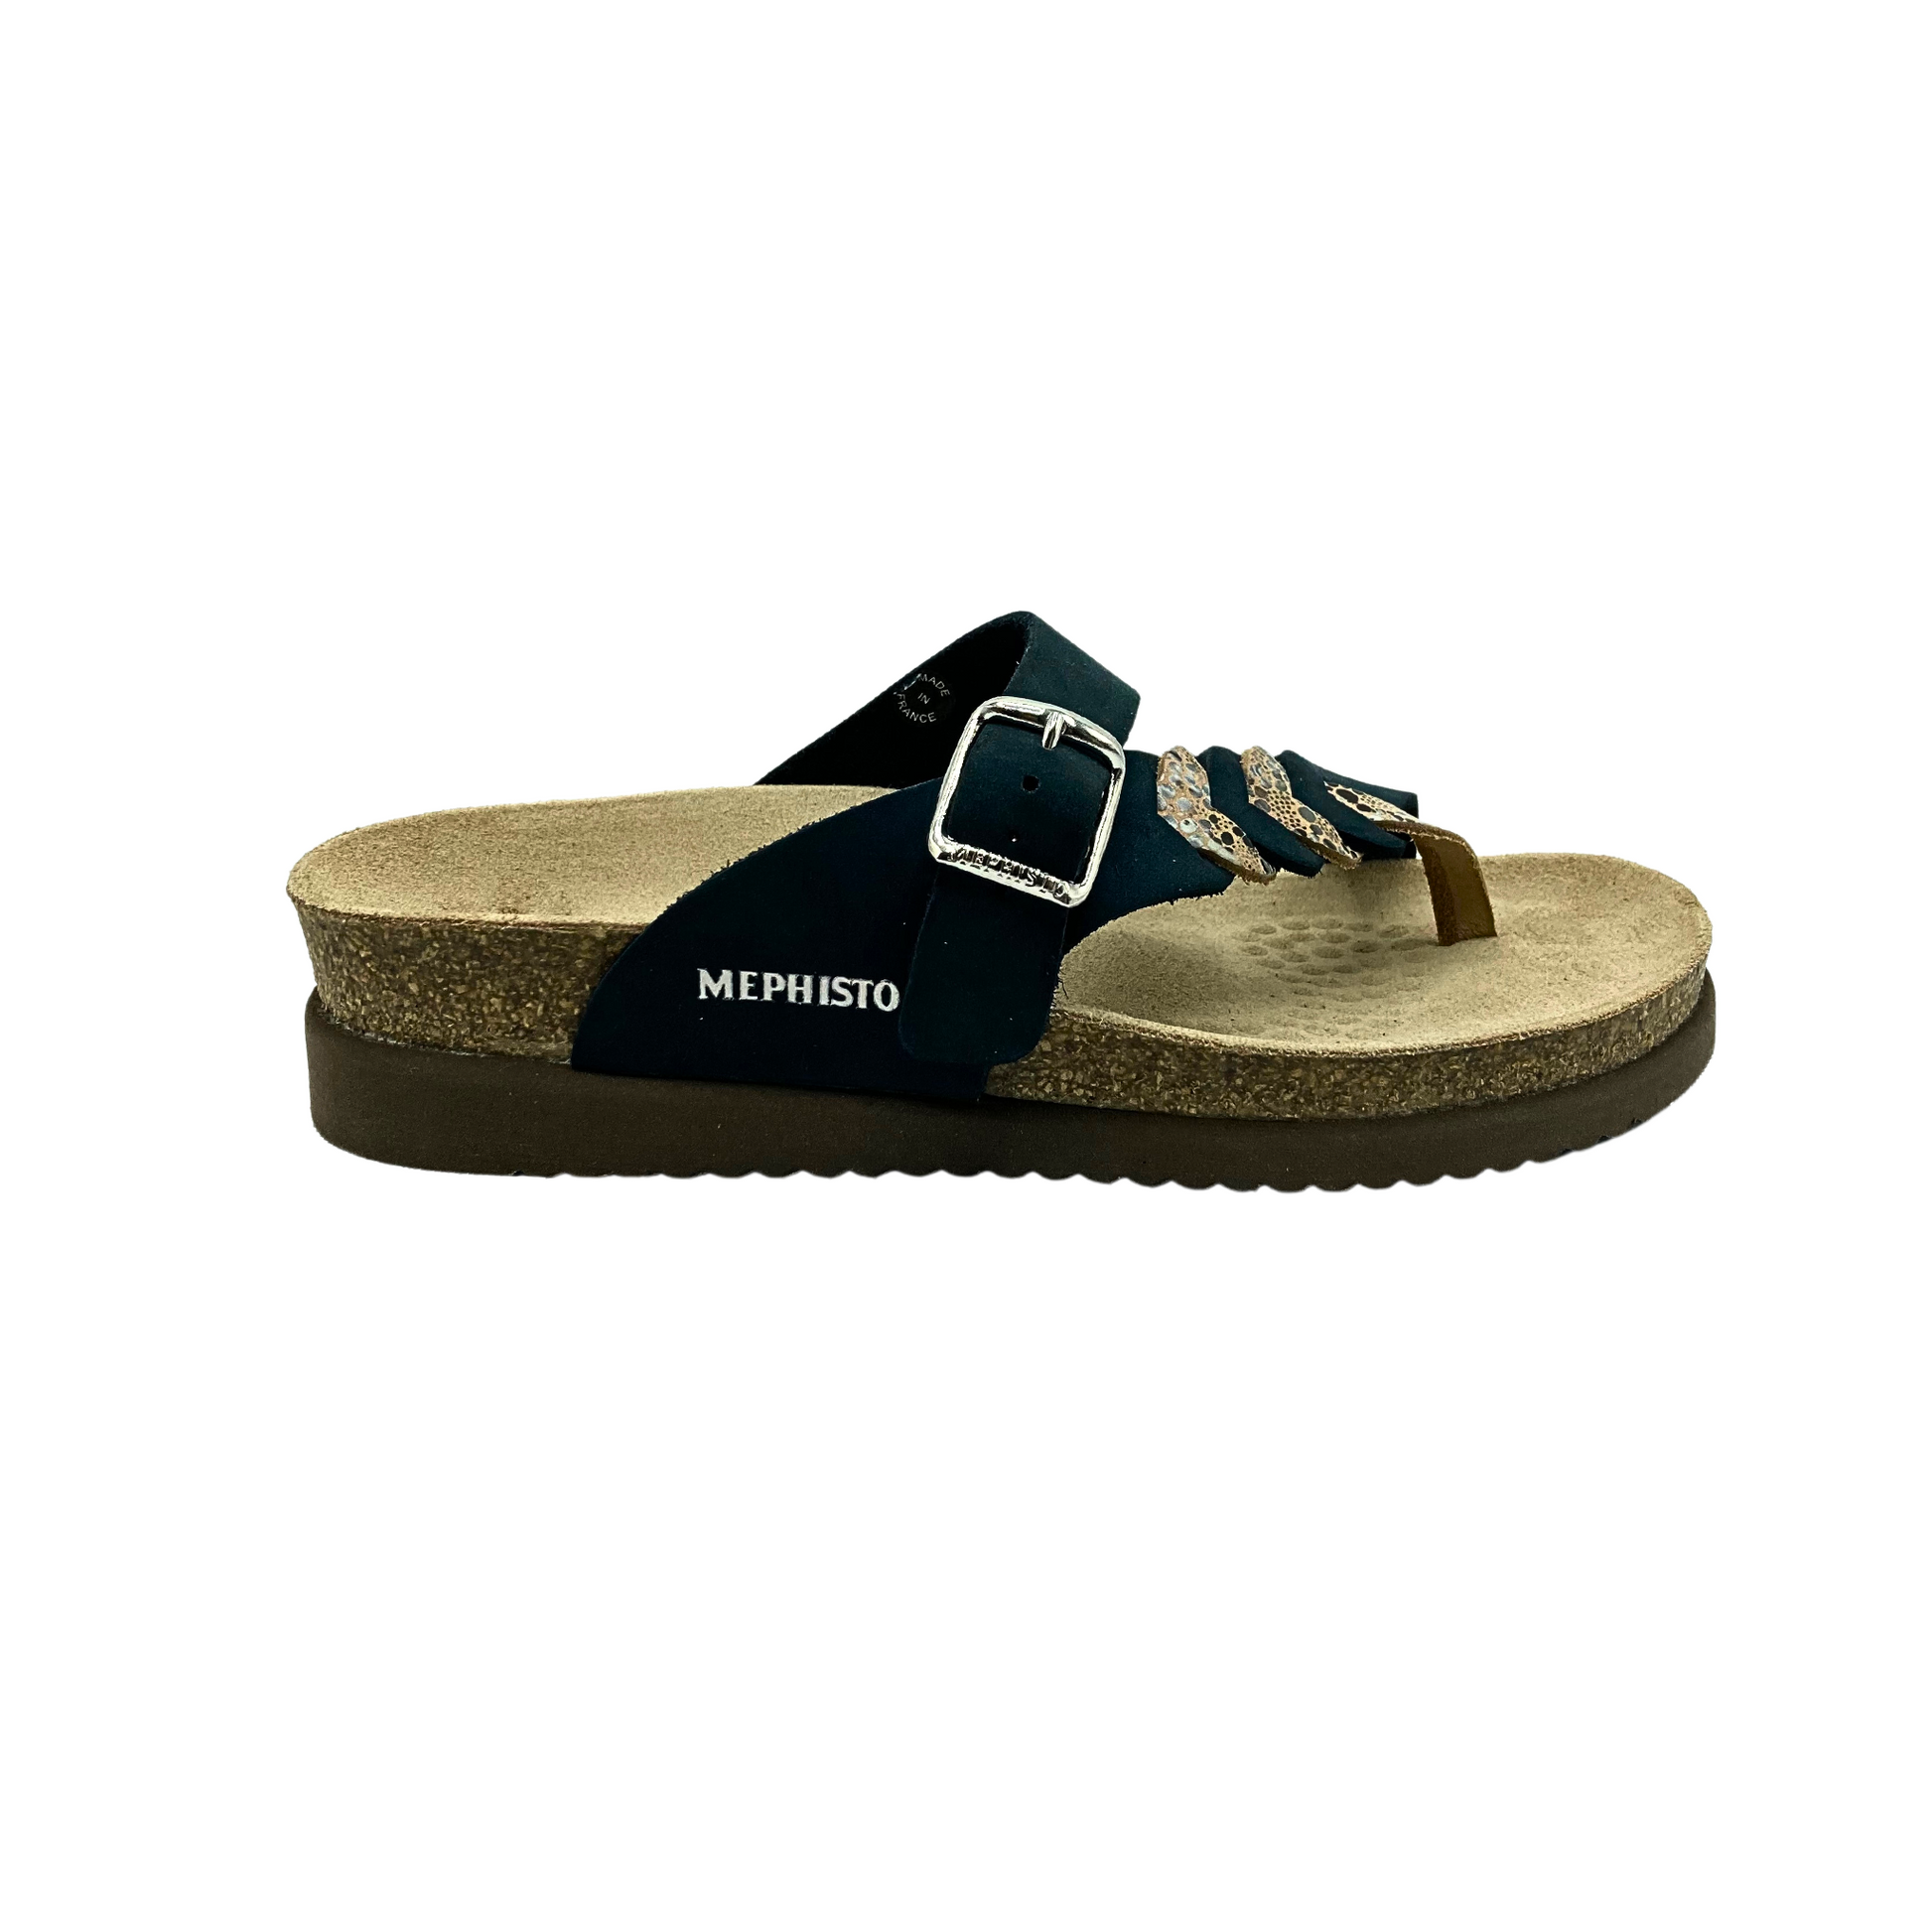 Outside view of right shoe.  Beautifully contoured footbed for the utmost comfort and support.